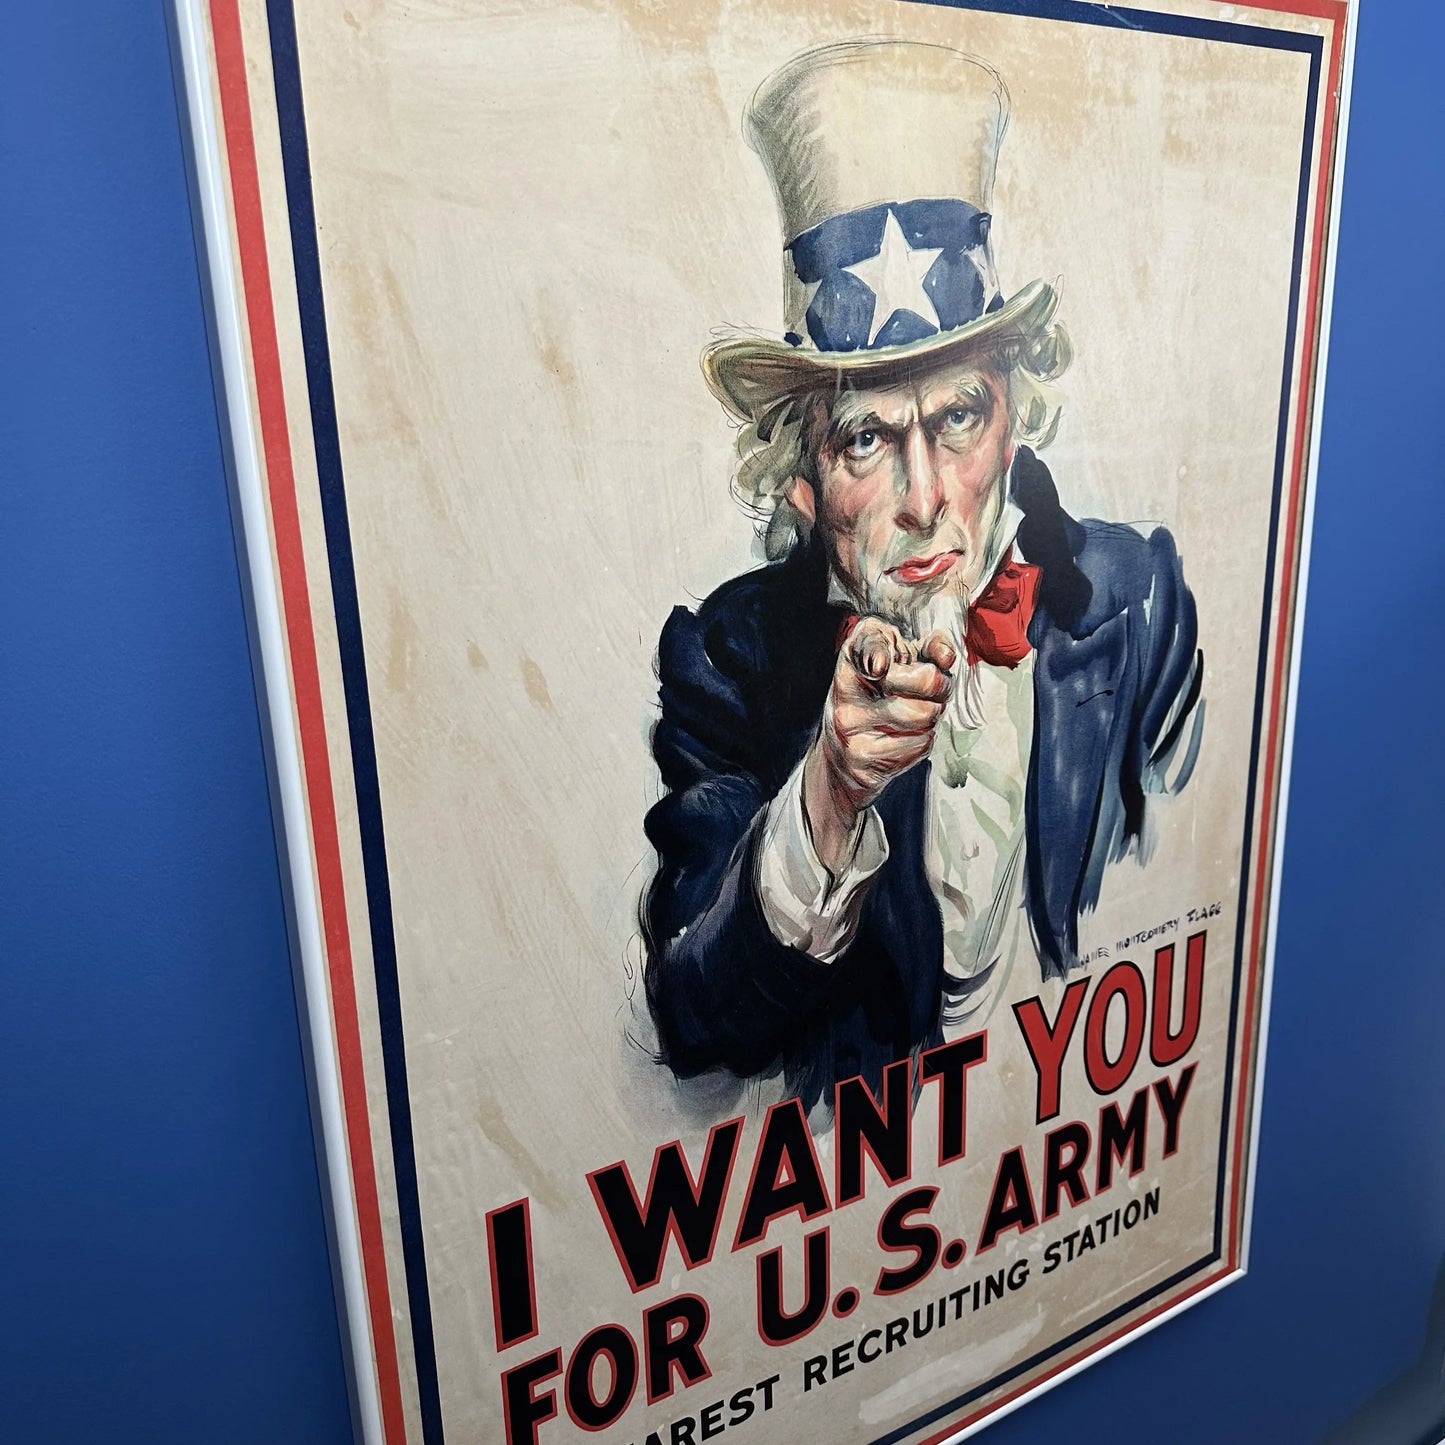 Original 1917 WWI recruiting poster — "I Want You" — Framed